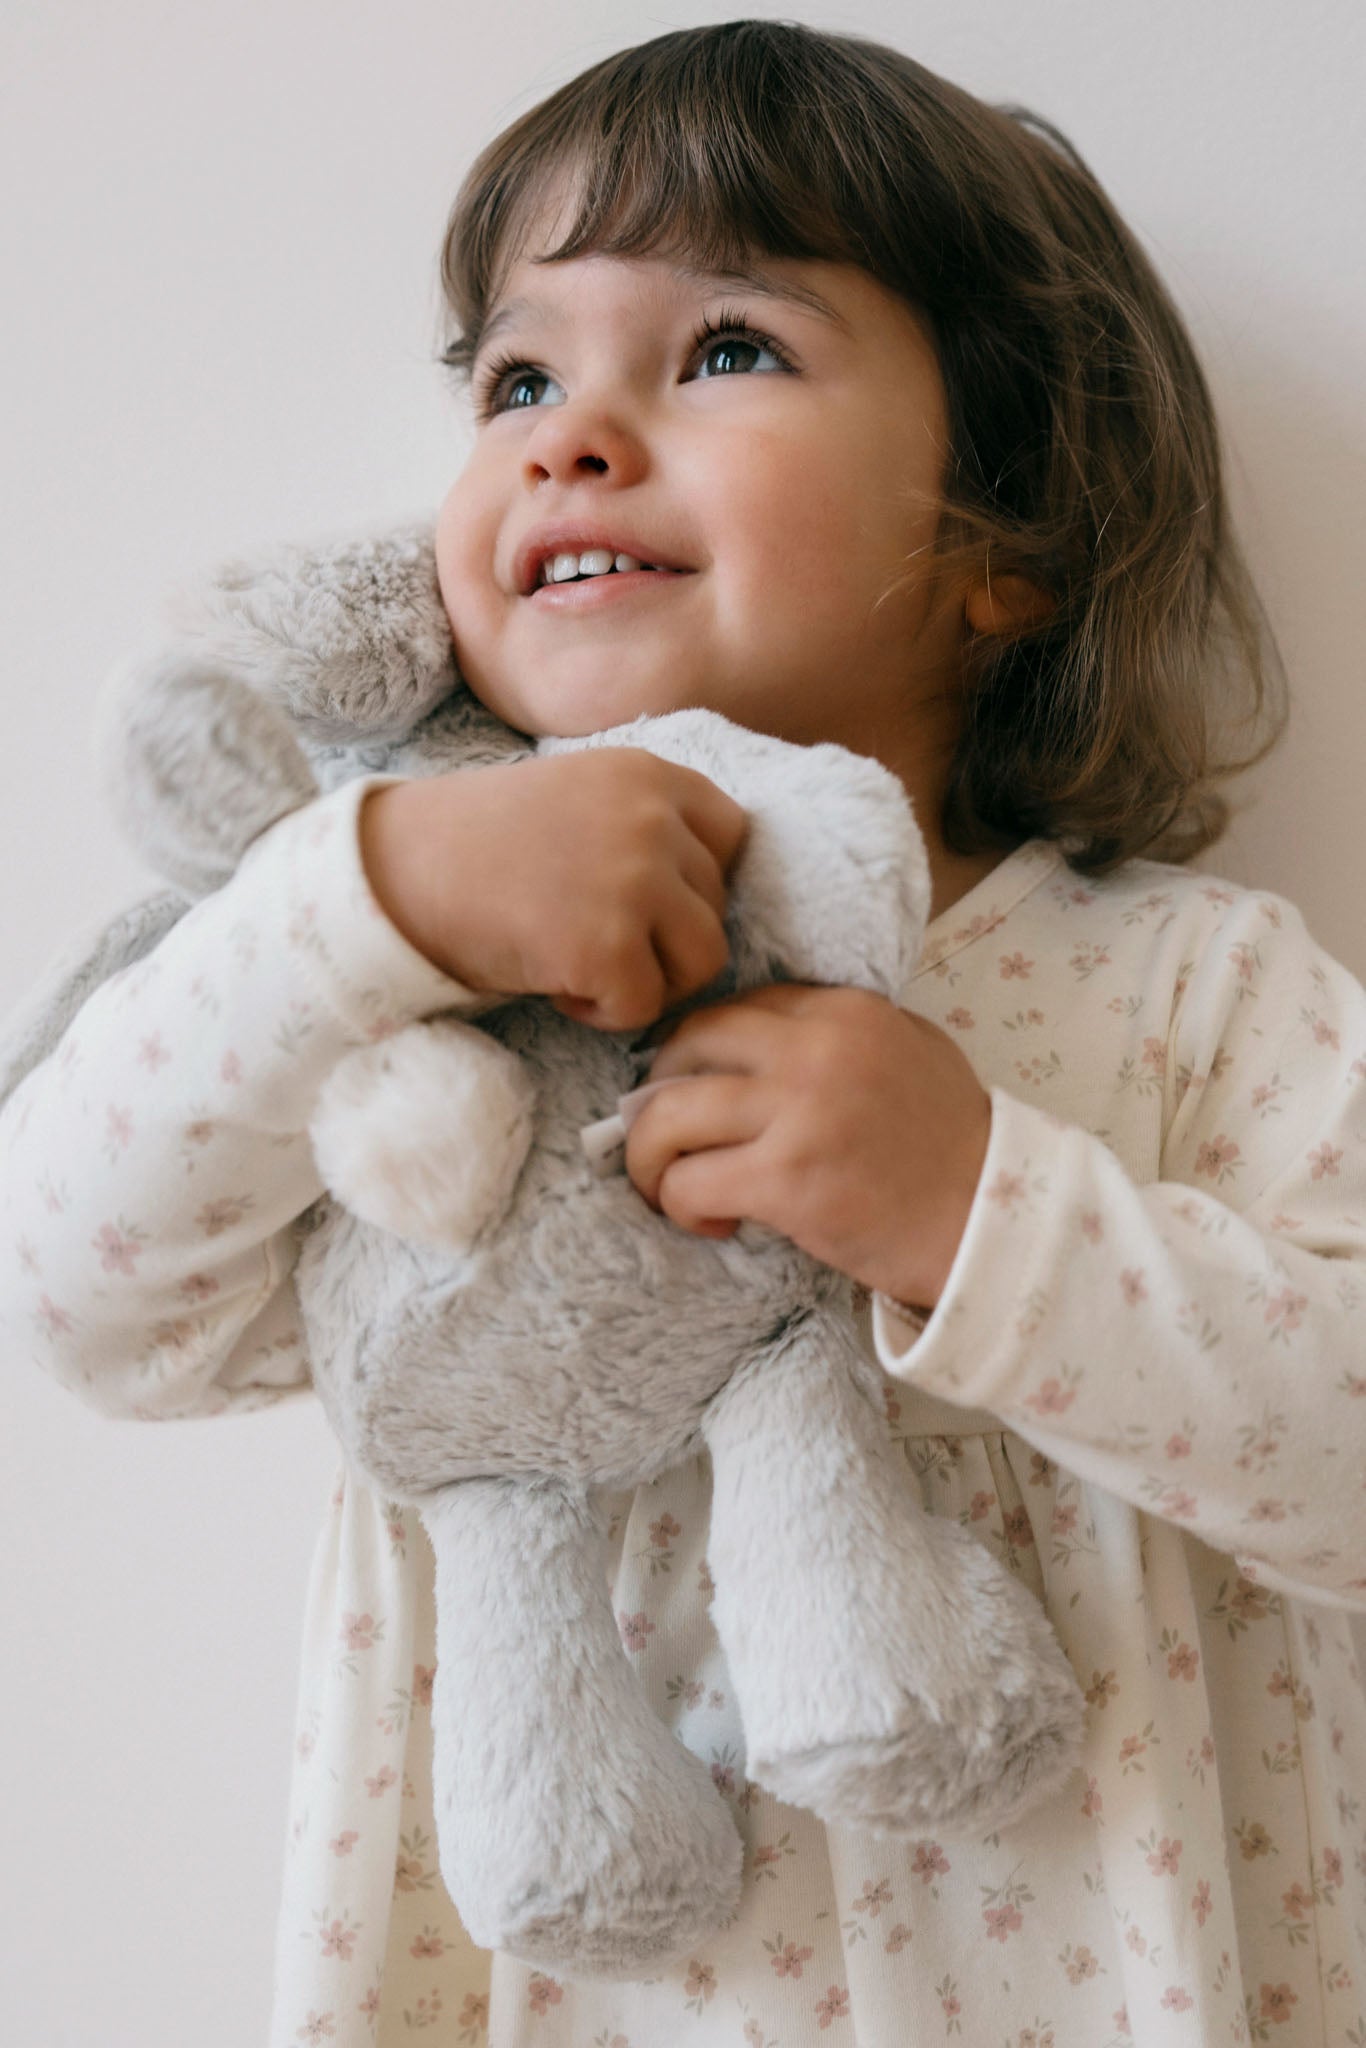 Snuggle Bunnies | Penelope the Bunny | Willow